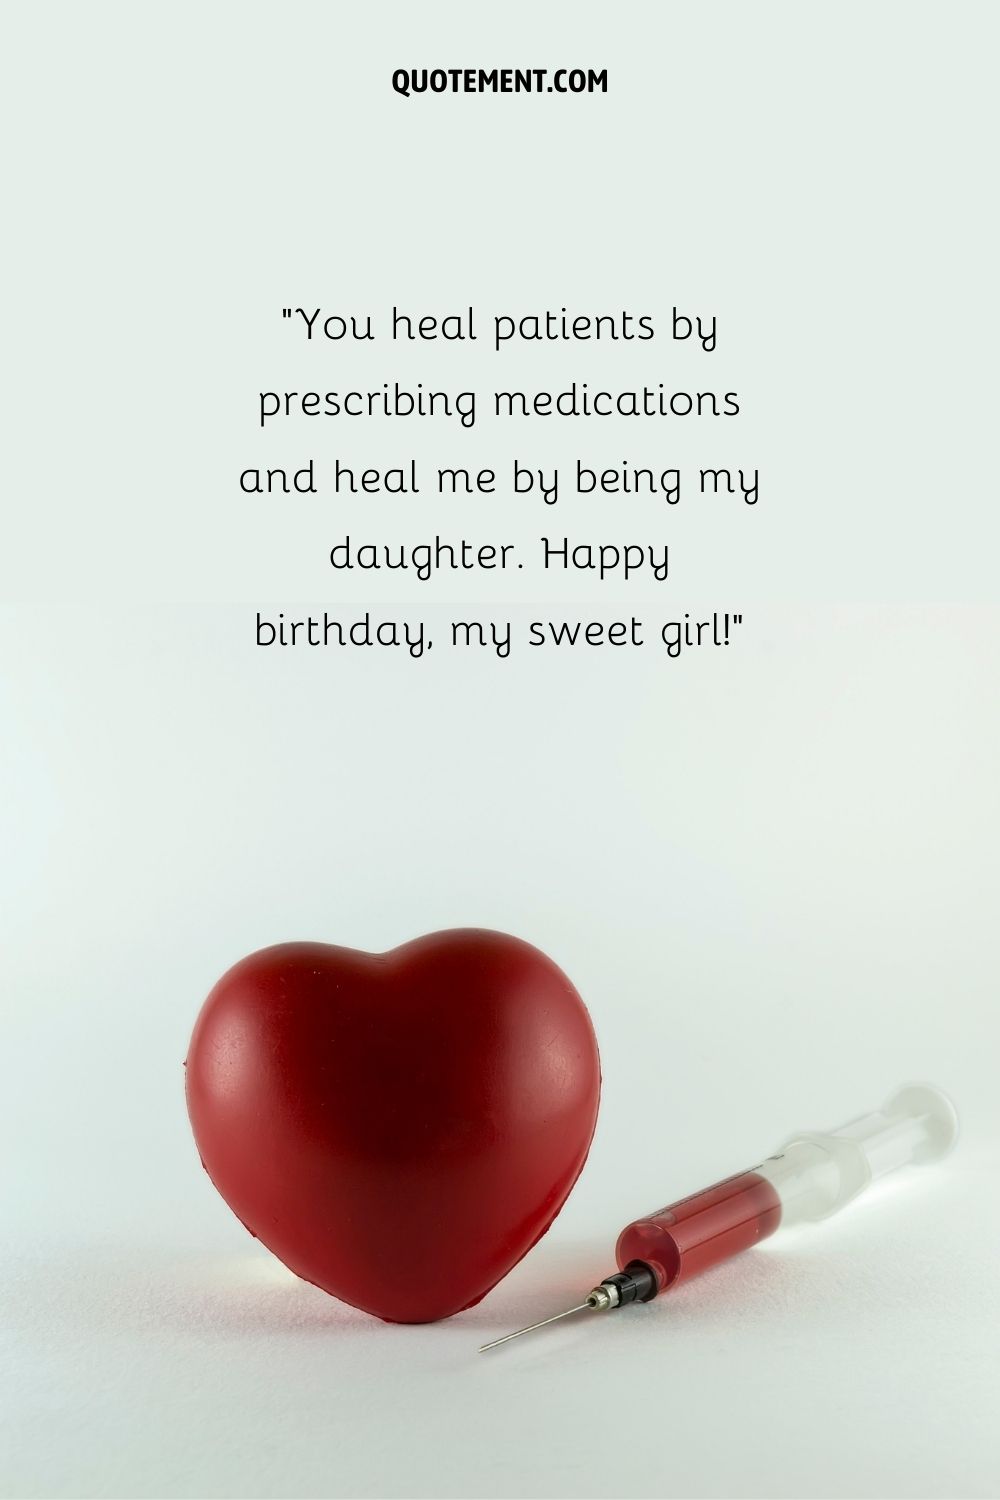 touching birthday wish for daughter representing happy birthday wish for dr